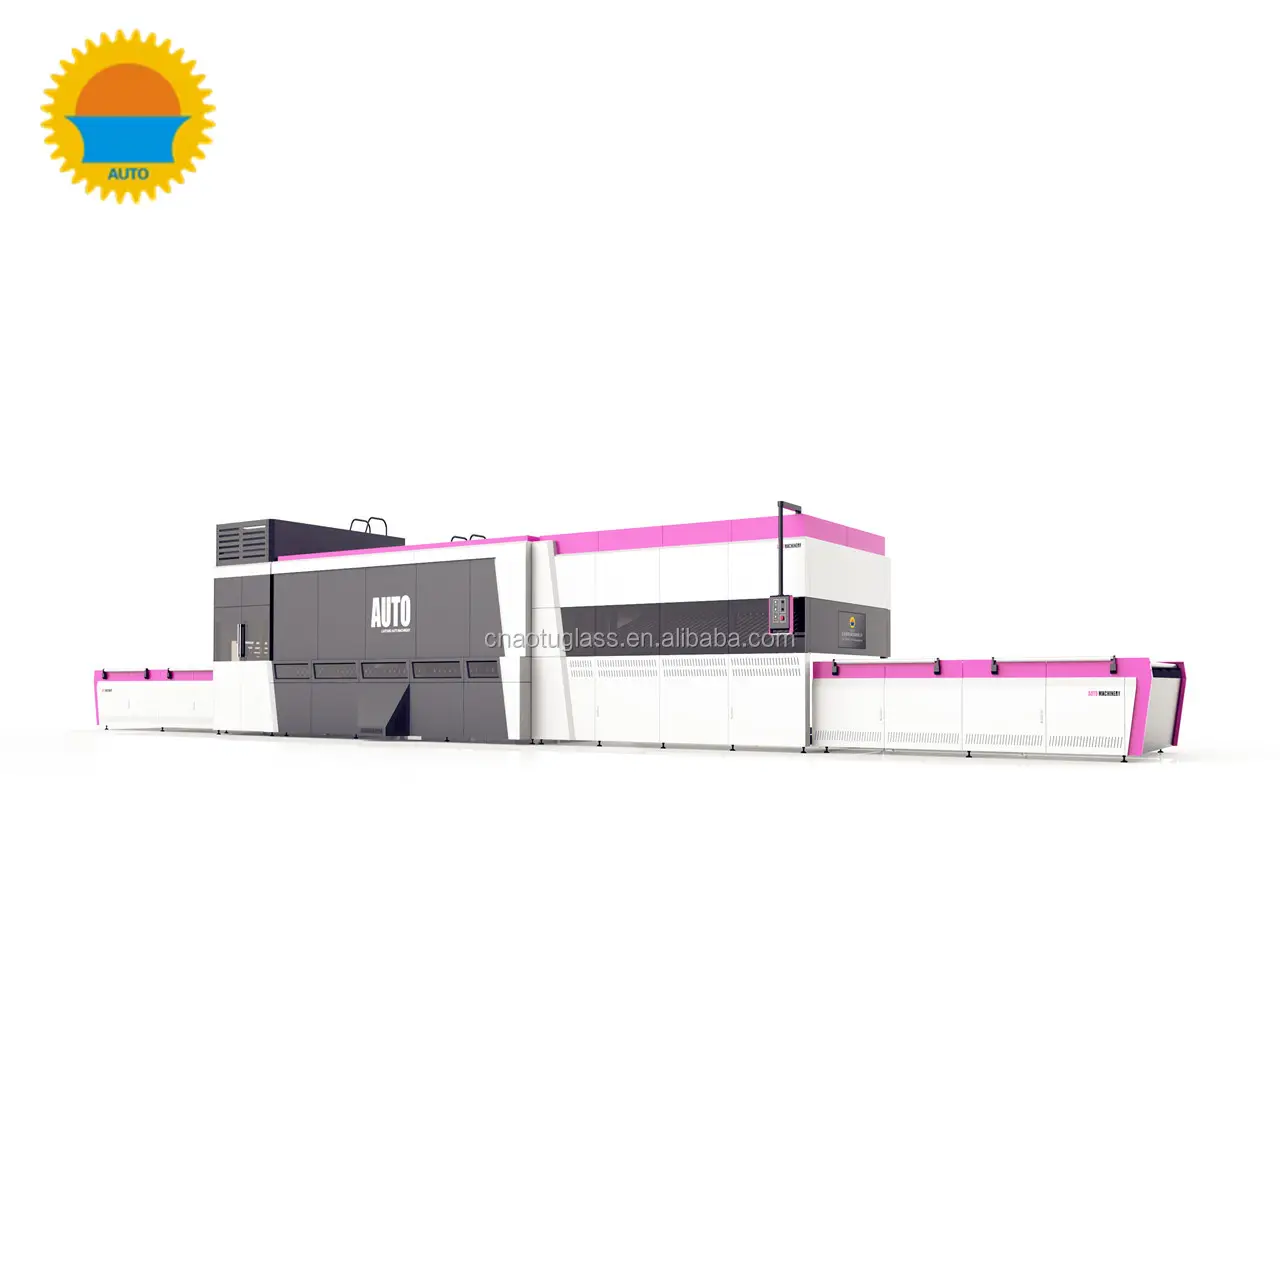 2019 new Overseas service provided 4-19mm Convection flat glass tempering oven